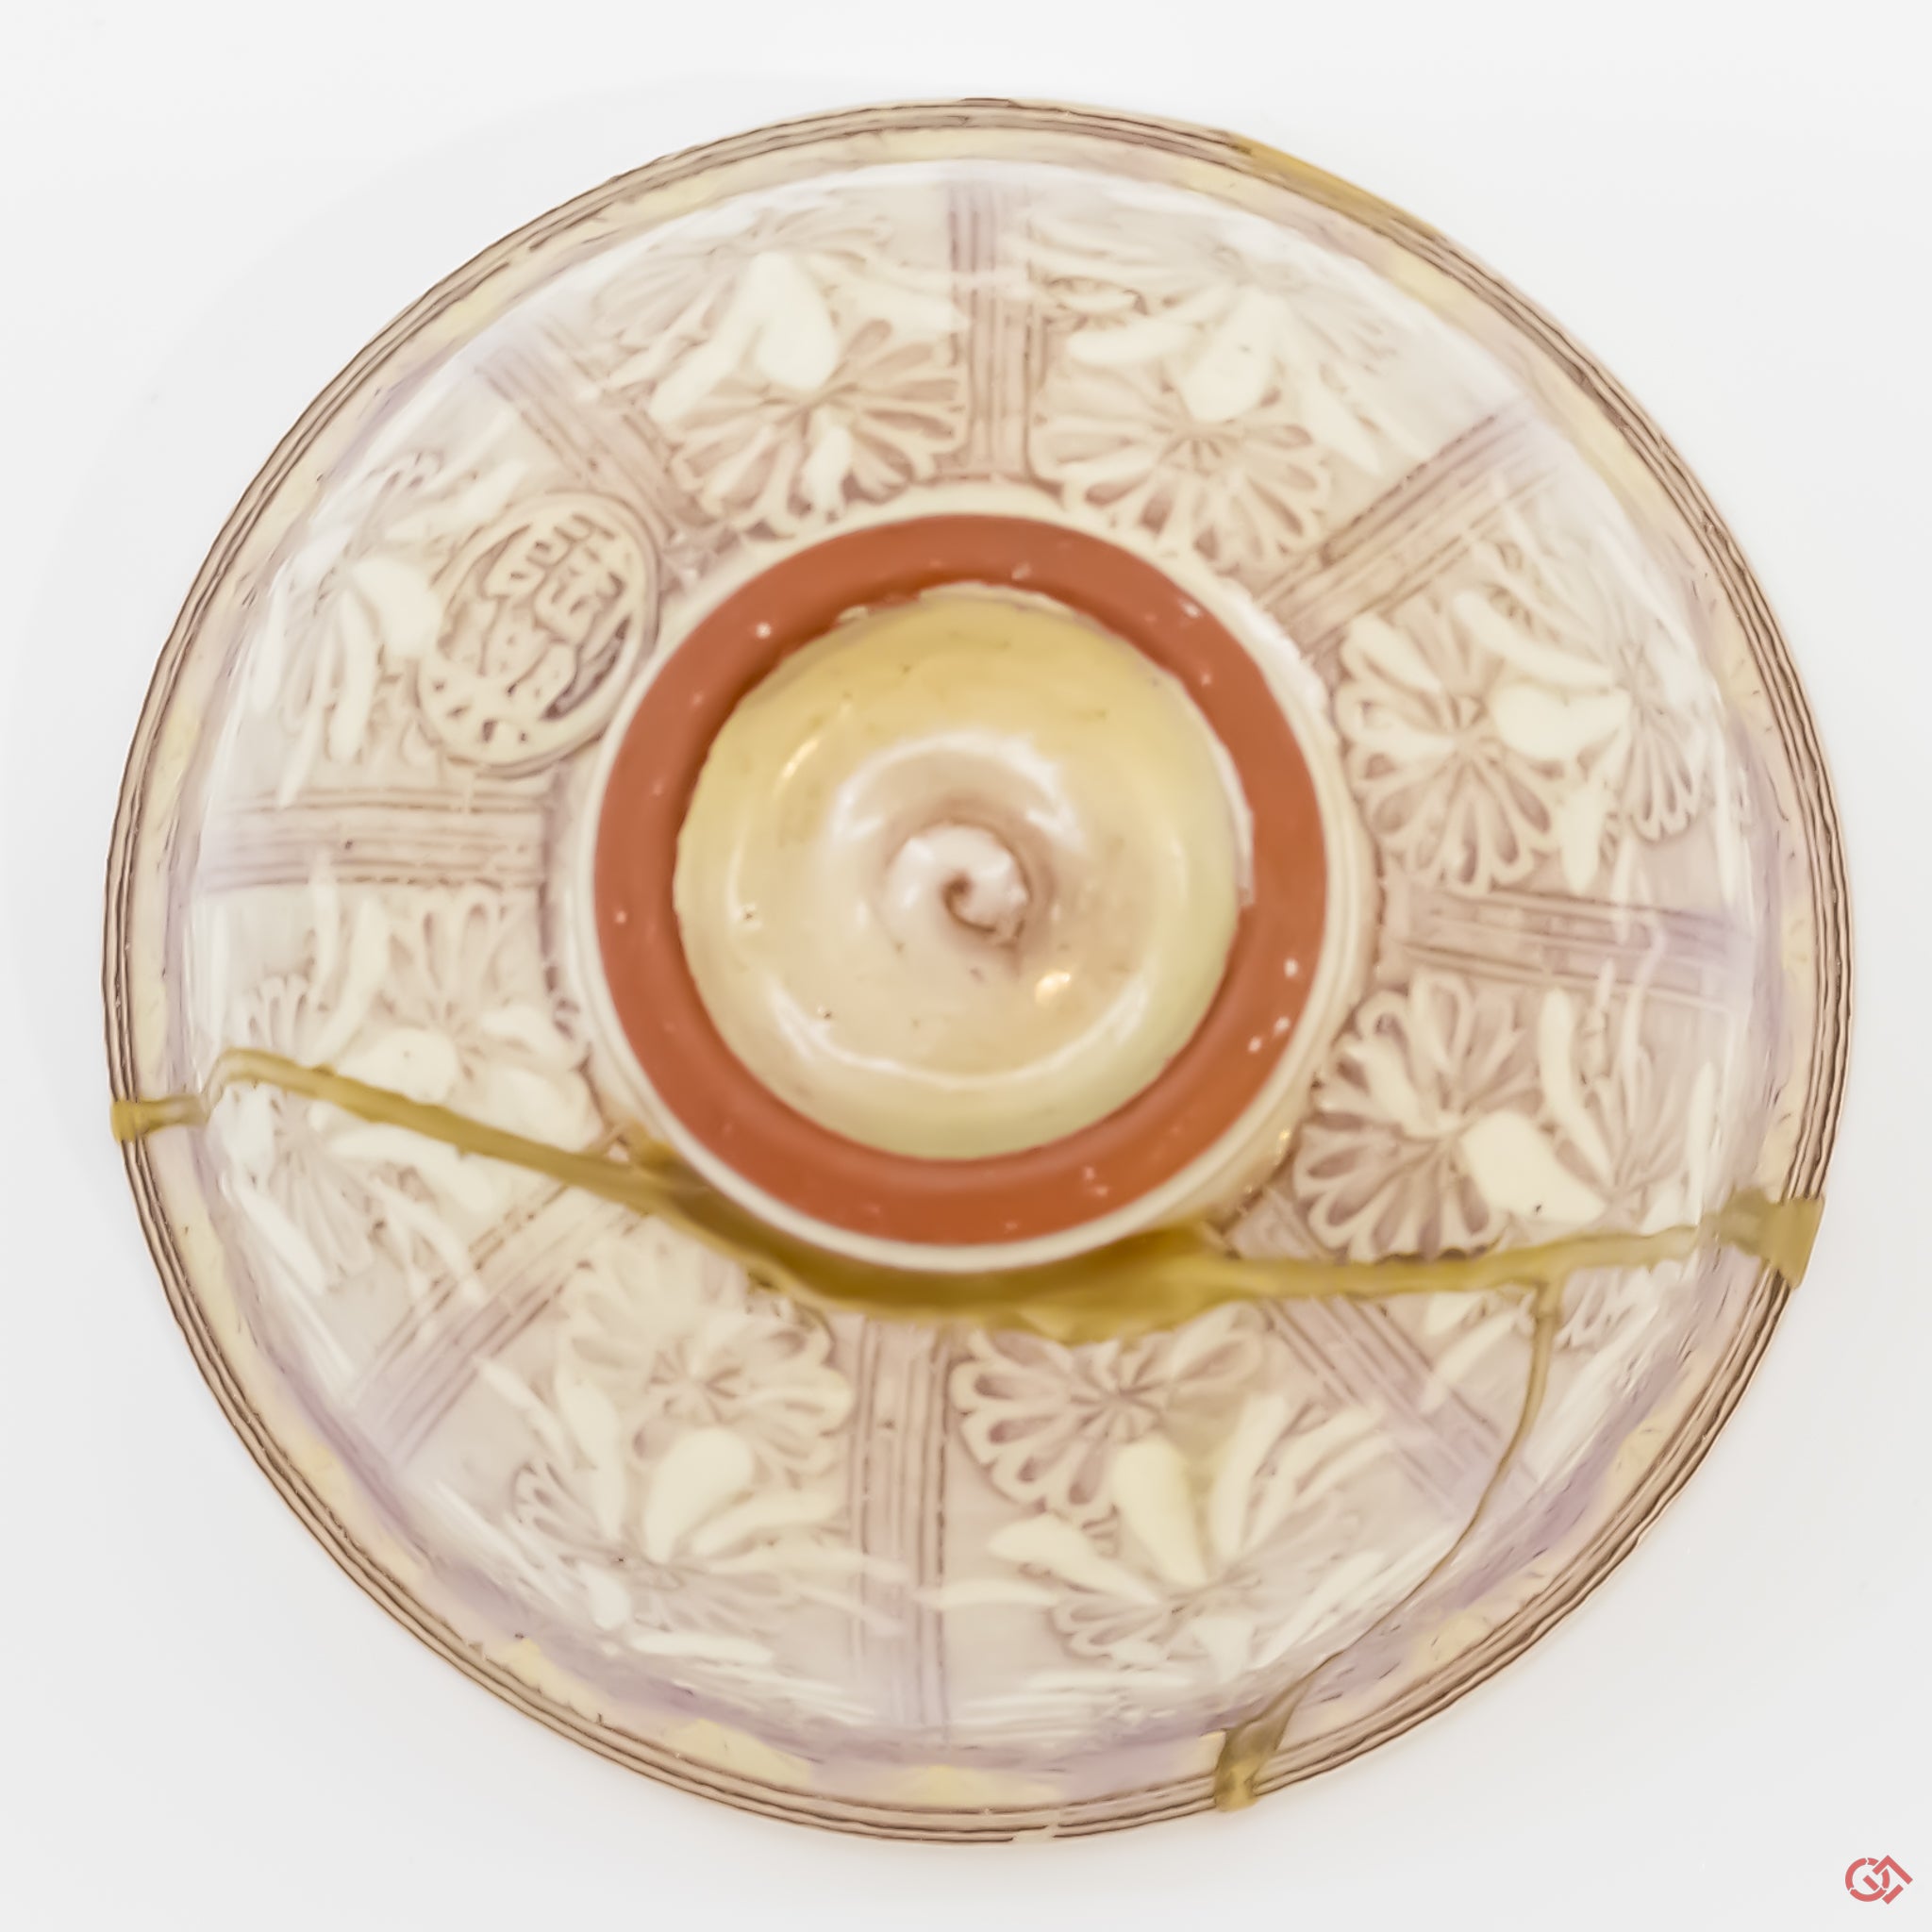 Photo of the bottom side of an authentic Kintsugi pottery piece, showing its overall design and features